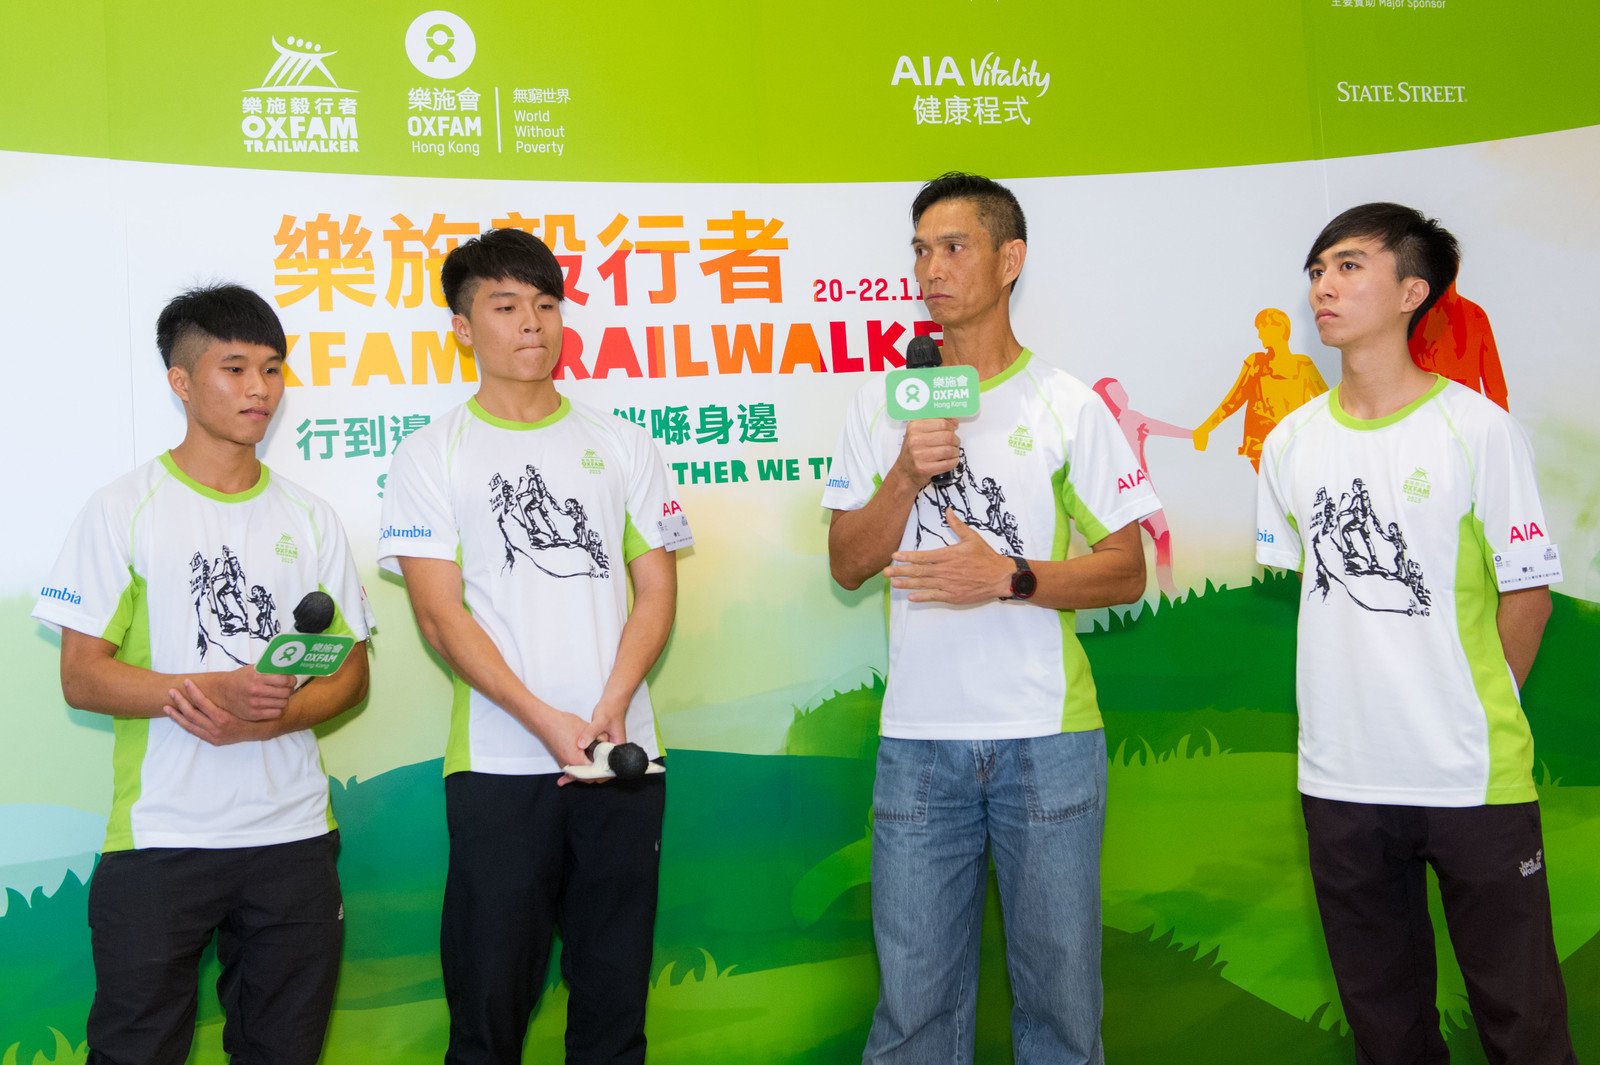 Chan Kwok Keung (second from right), Super Trailwalker veteran and coach of the Christian Zheng Sheng College team, hopes students will learn the meaning of perseverance and commitment, which will enable them to reintegrate into society.